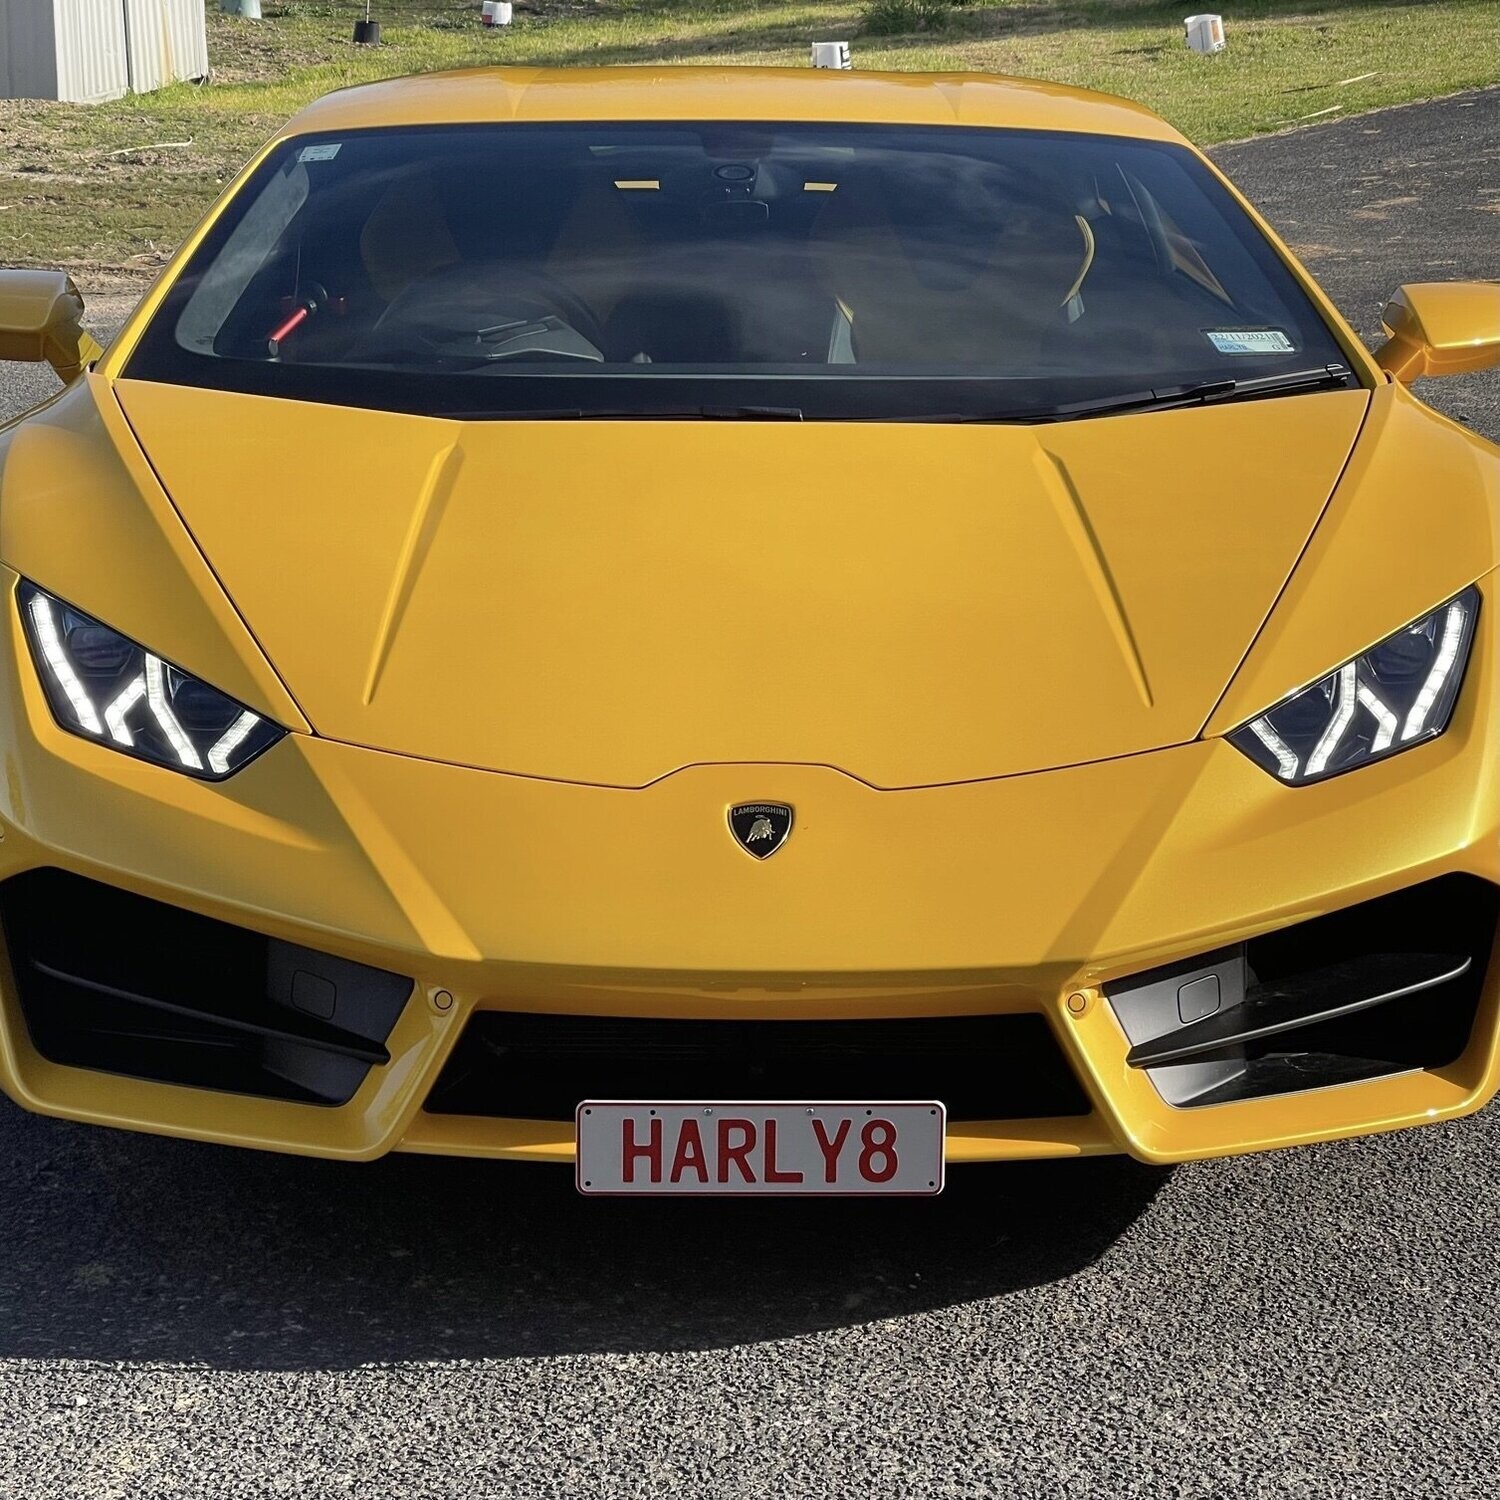 Huracan LP580-2 coupe front license bracket